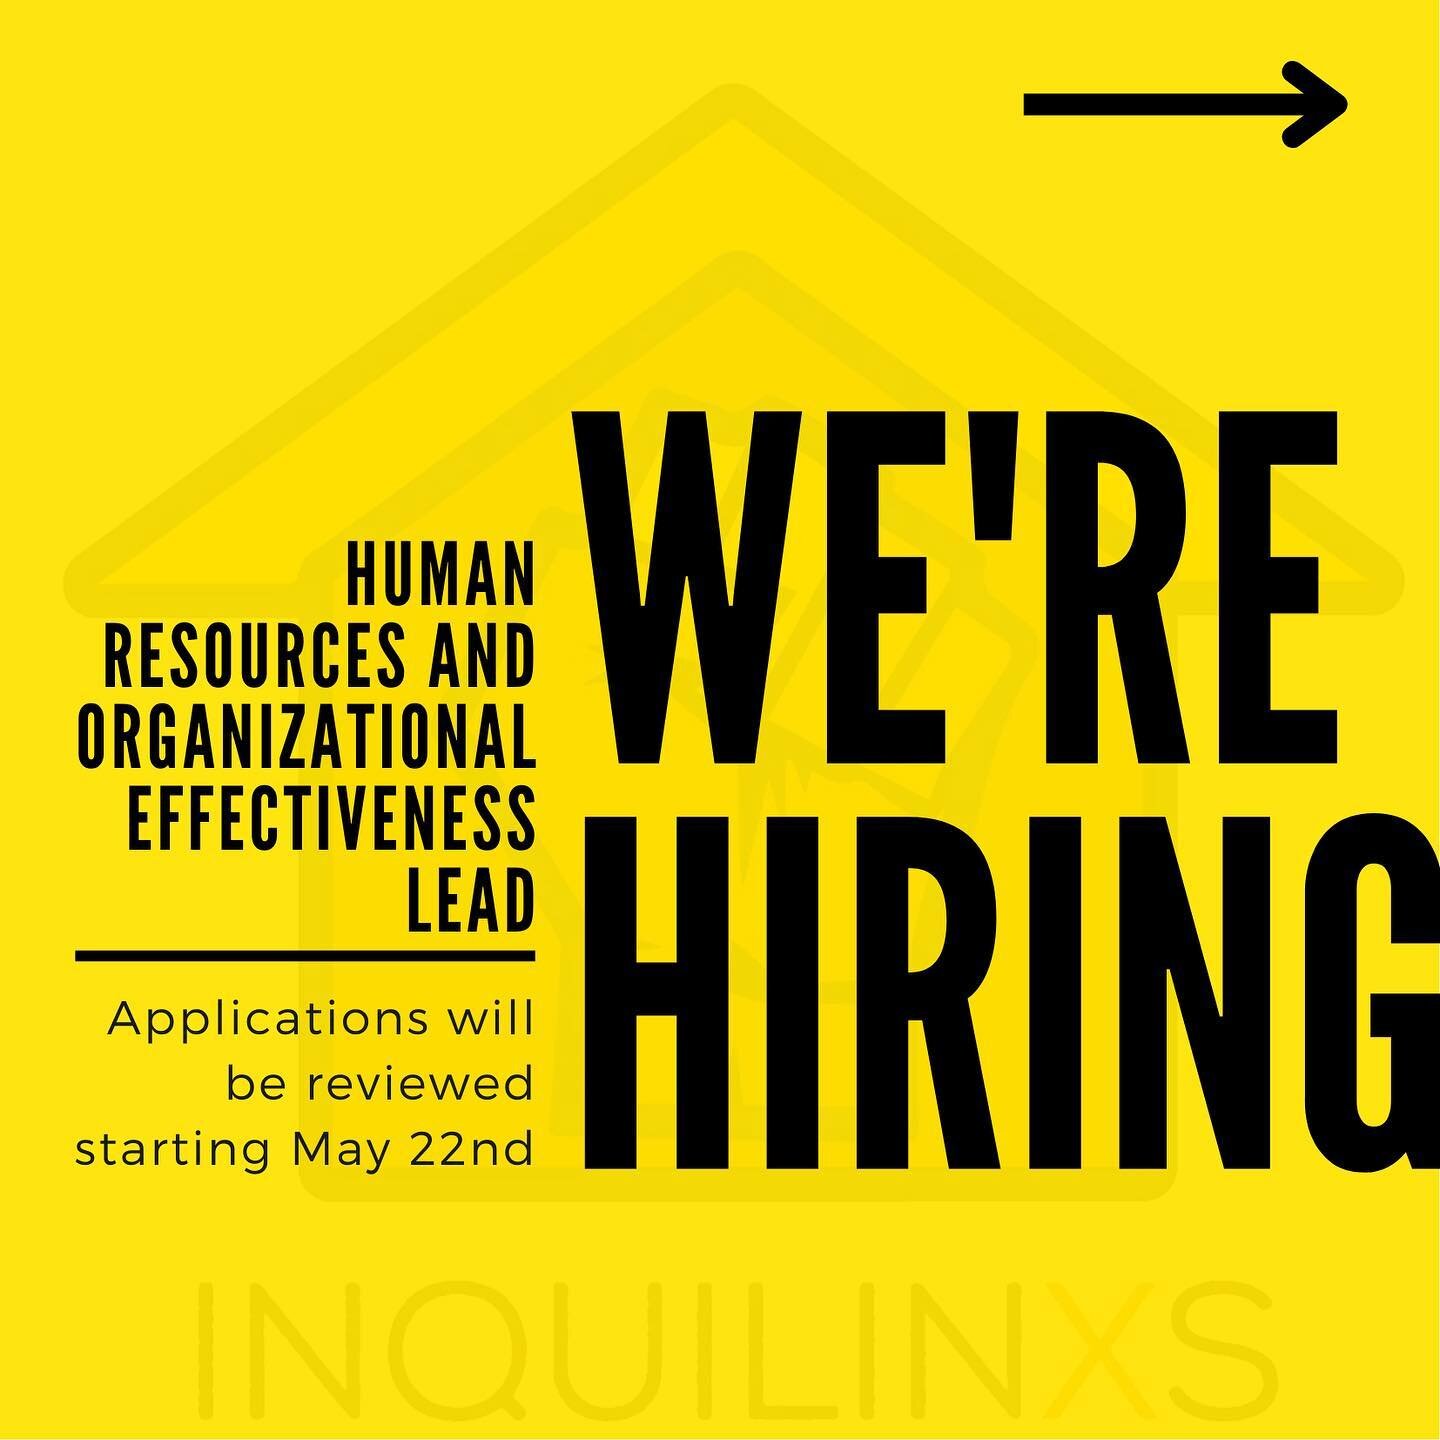 We're hiring a Human Resources and Organizational Effectiveness Lead! The position is open until filled. We will begin actively reviewing applications on May 22nd, but as long as this job description is on the website, applications will be accepted. 